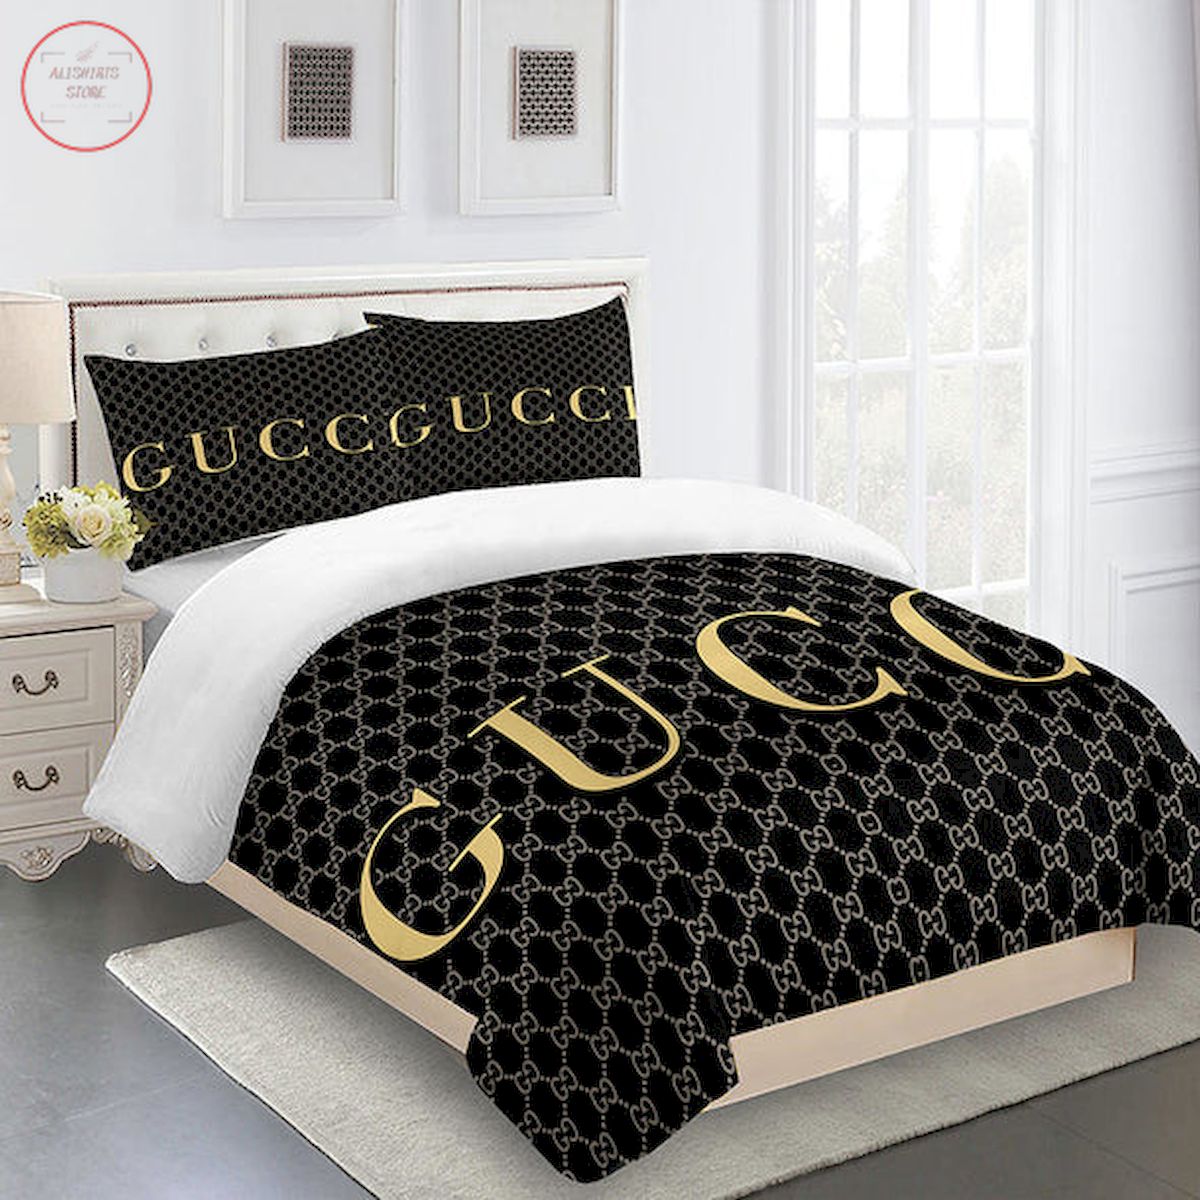 Gucci bedding set black and gold Luxury bed sheets